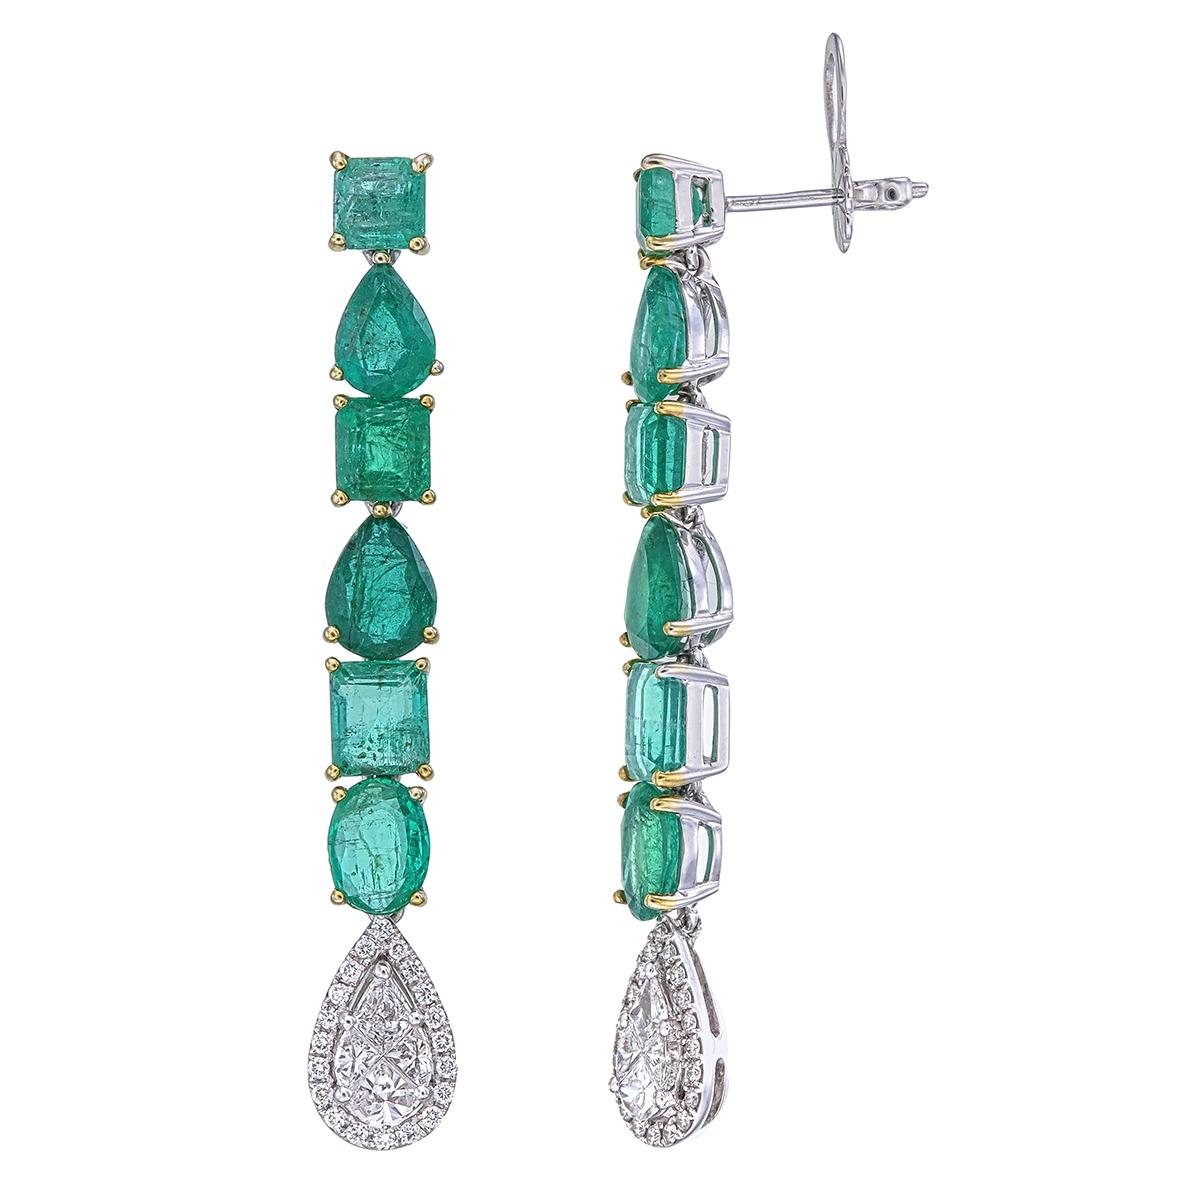 These are one of its kind earrings from the limited edition collection.
We have used natural Mix shaped Emeralds with the best color as you can see the image with various shapes to give a perfect grand touch.
The pear drop make it further elegant &